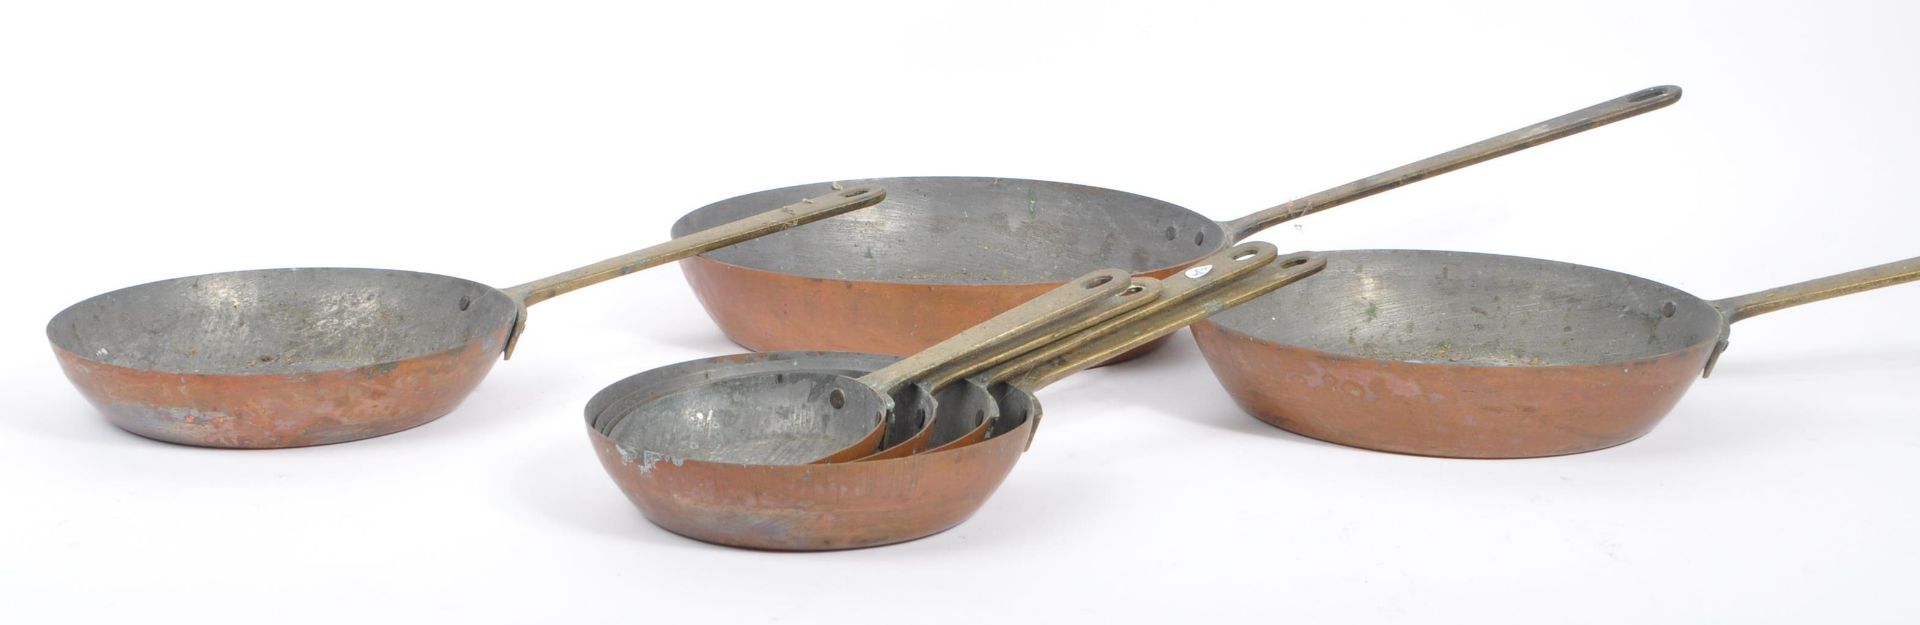 COLLECTION OF 19TH CENTURY VICTORIAN COPPER FRYING PANS - Image 5 of 7